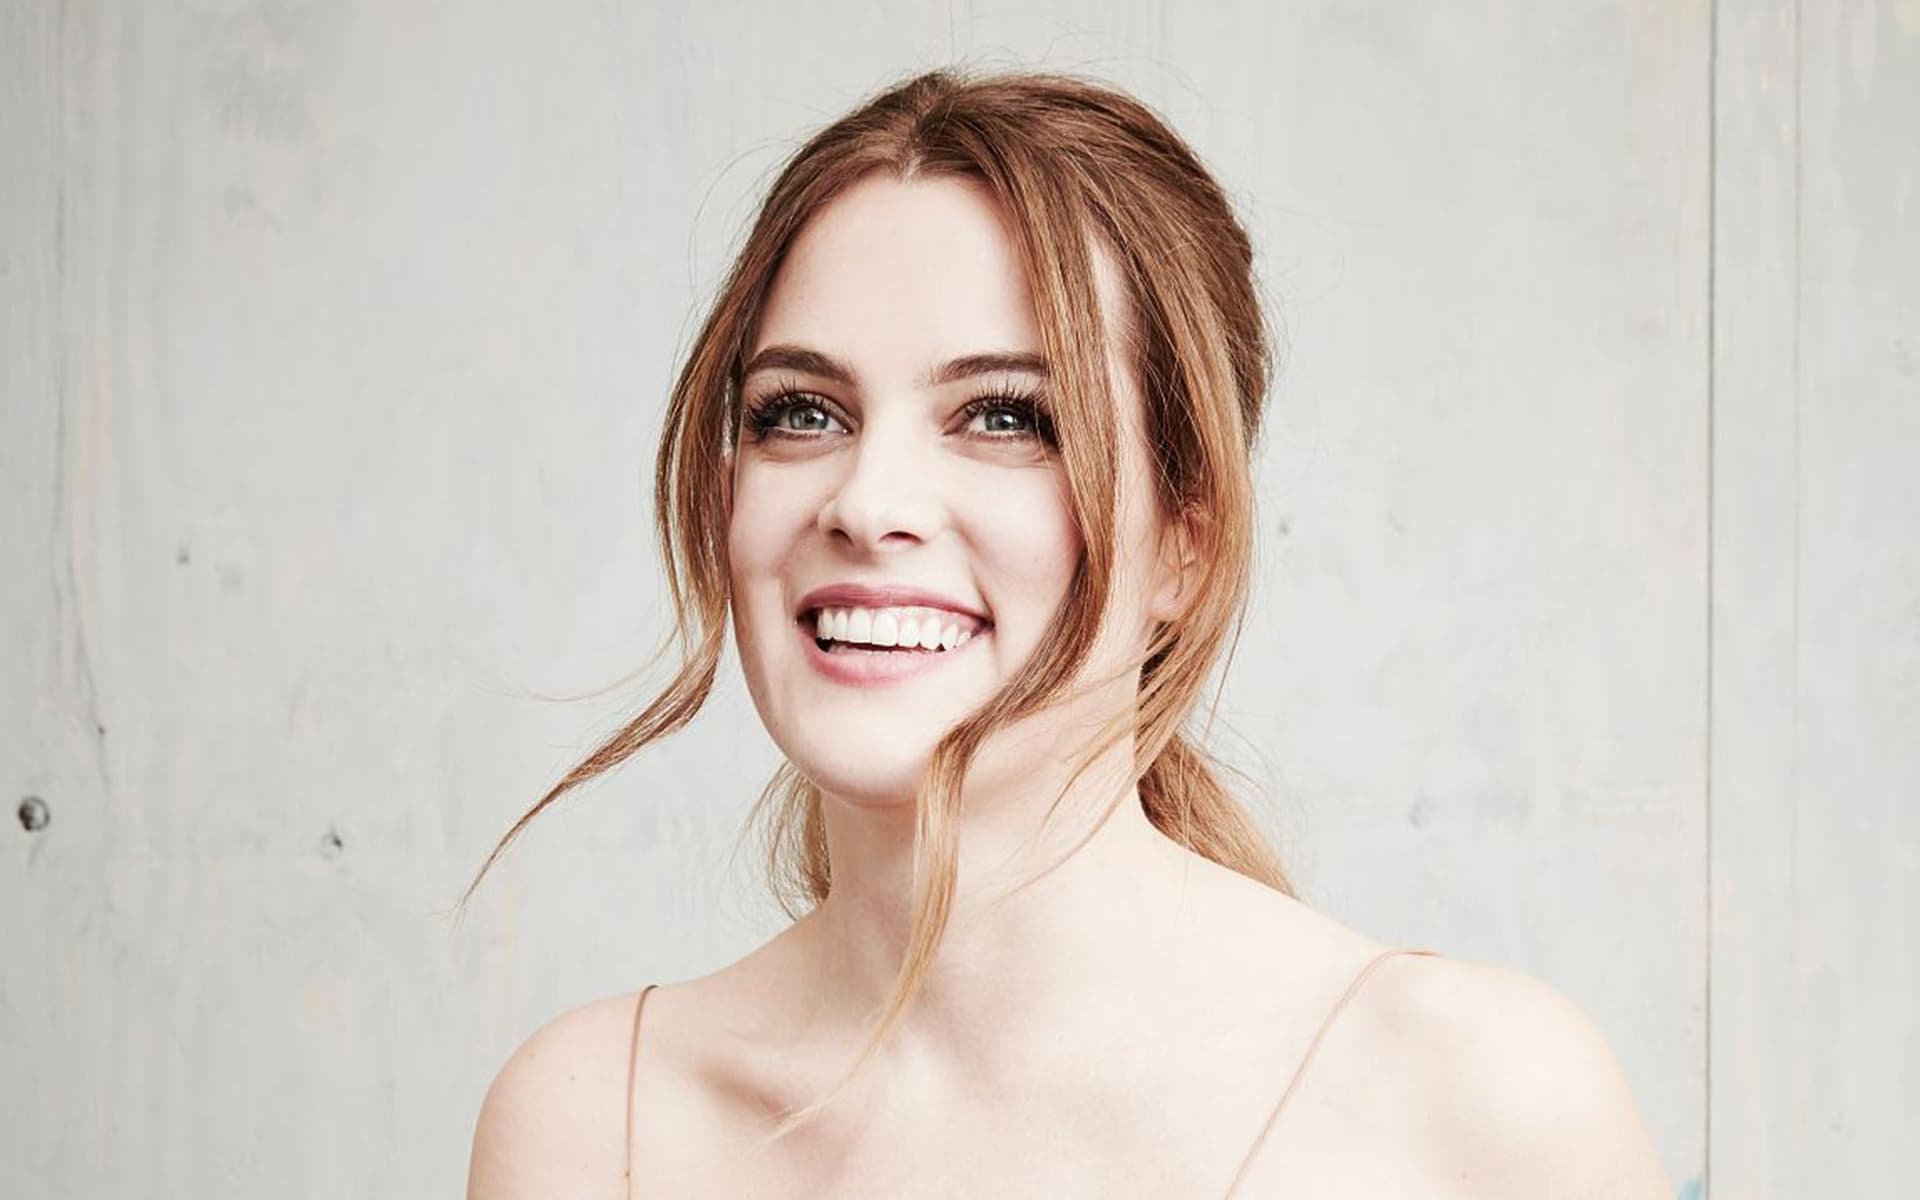 celebrity, riley keough, actress, face, redhead, smile